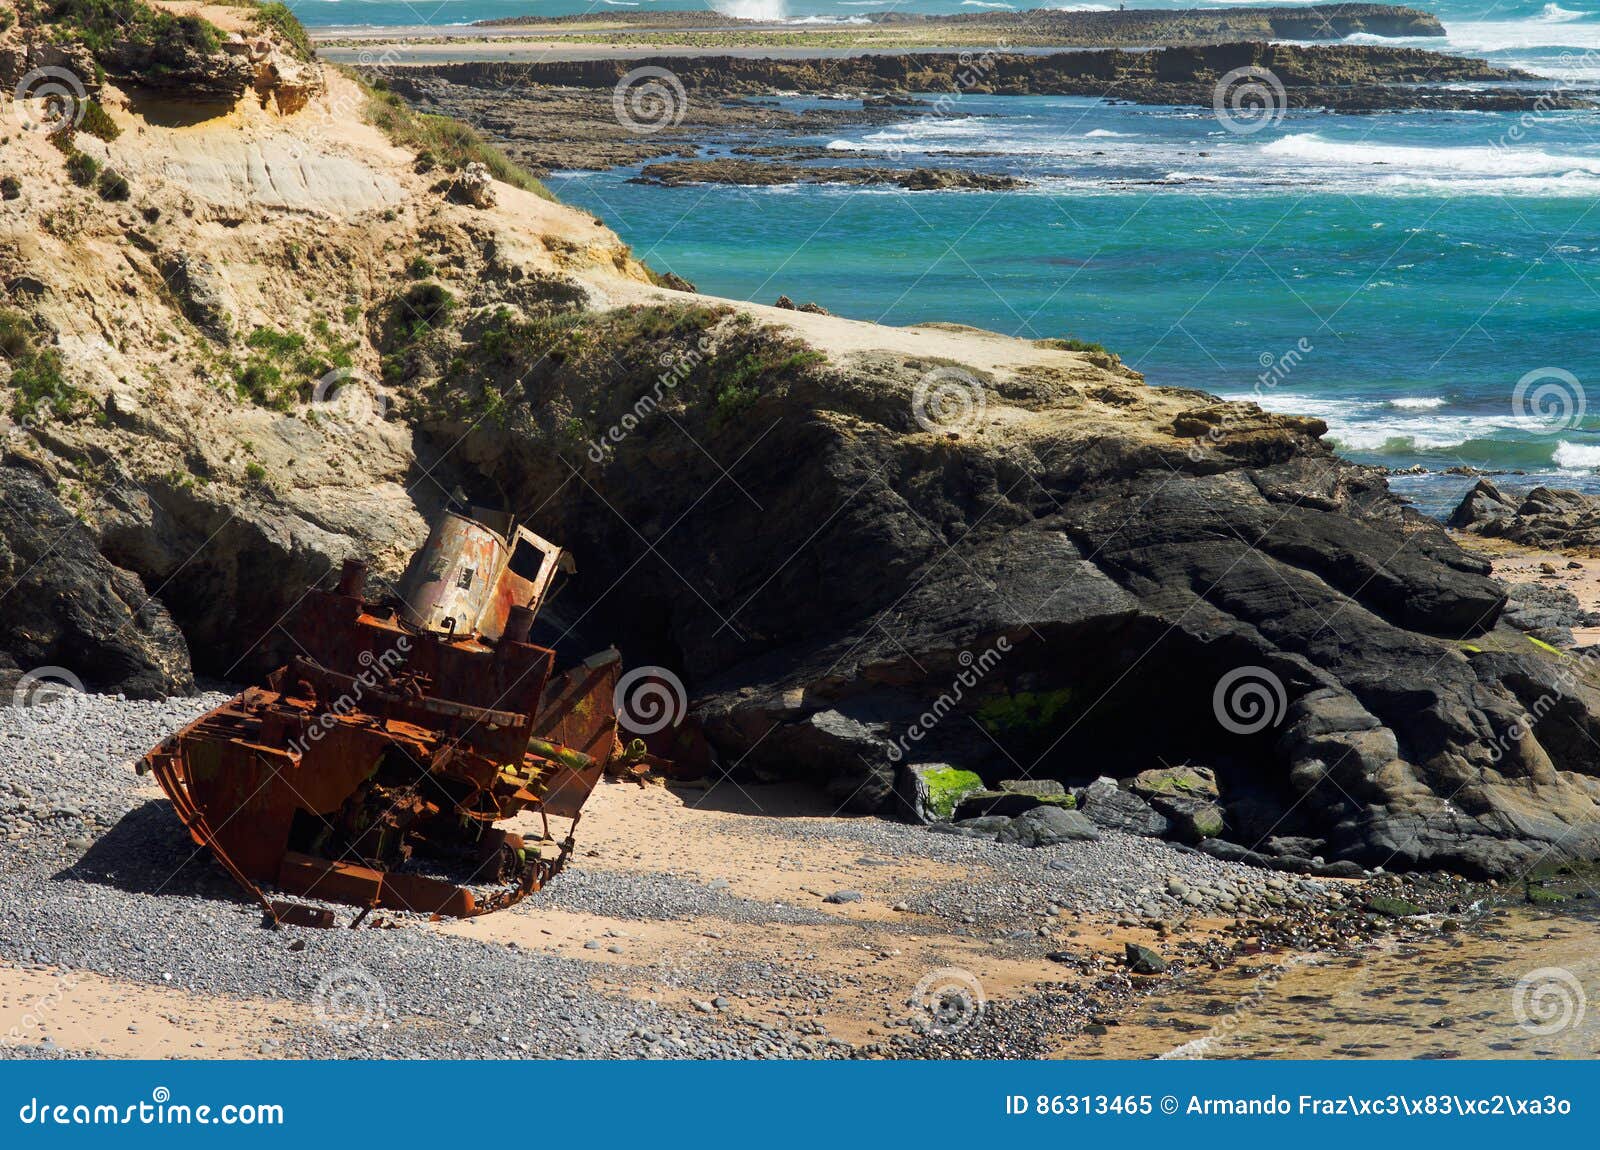 wrecked old and ruined pusher boat on the beach